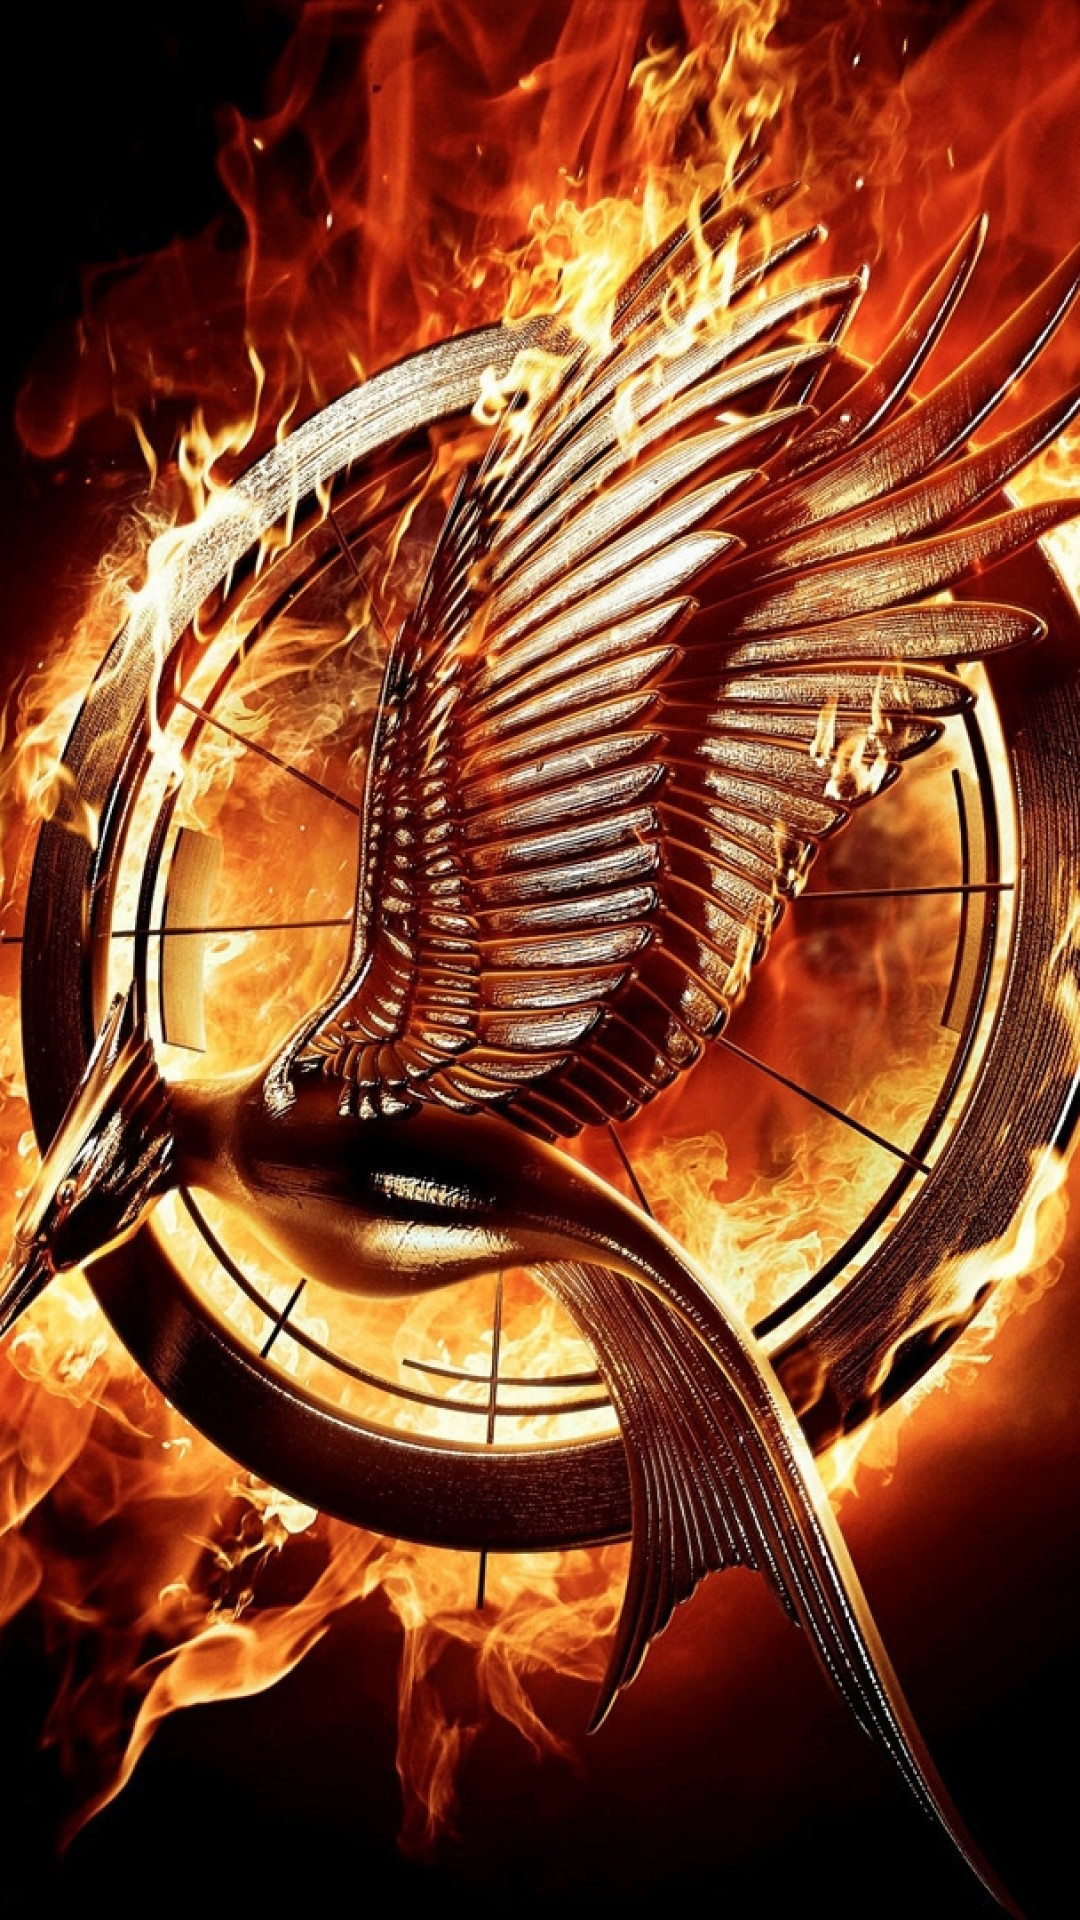 Hunger Games: Catching Fire, The film was theatrically released on November 15, 2013. 1080x1920 Full HD Wallpaper.